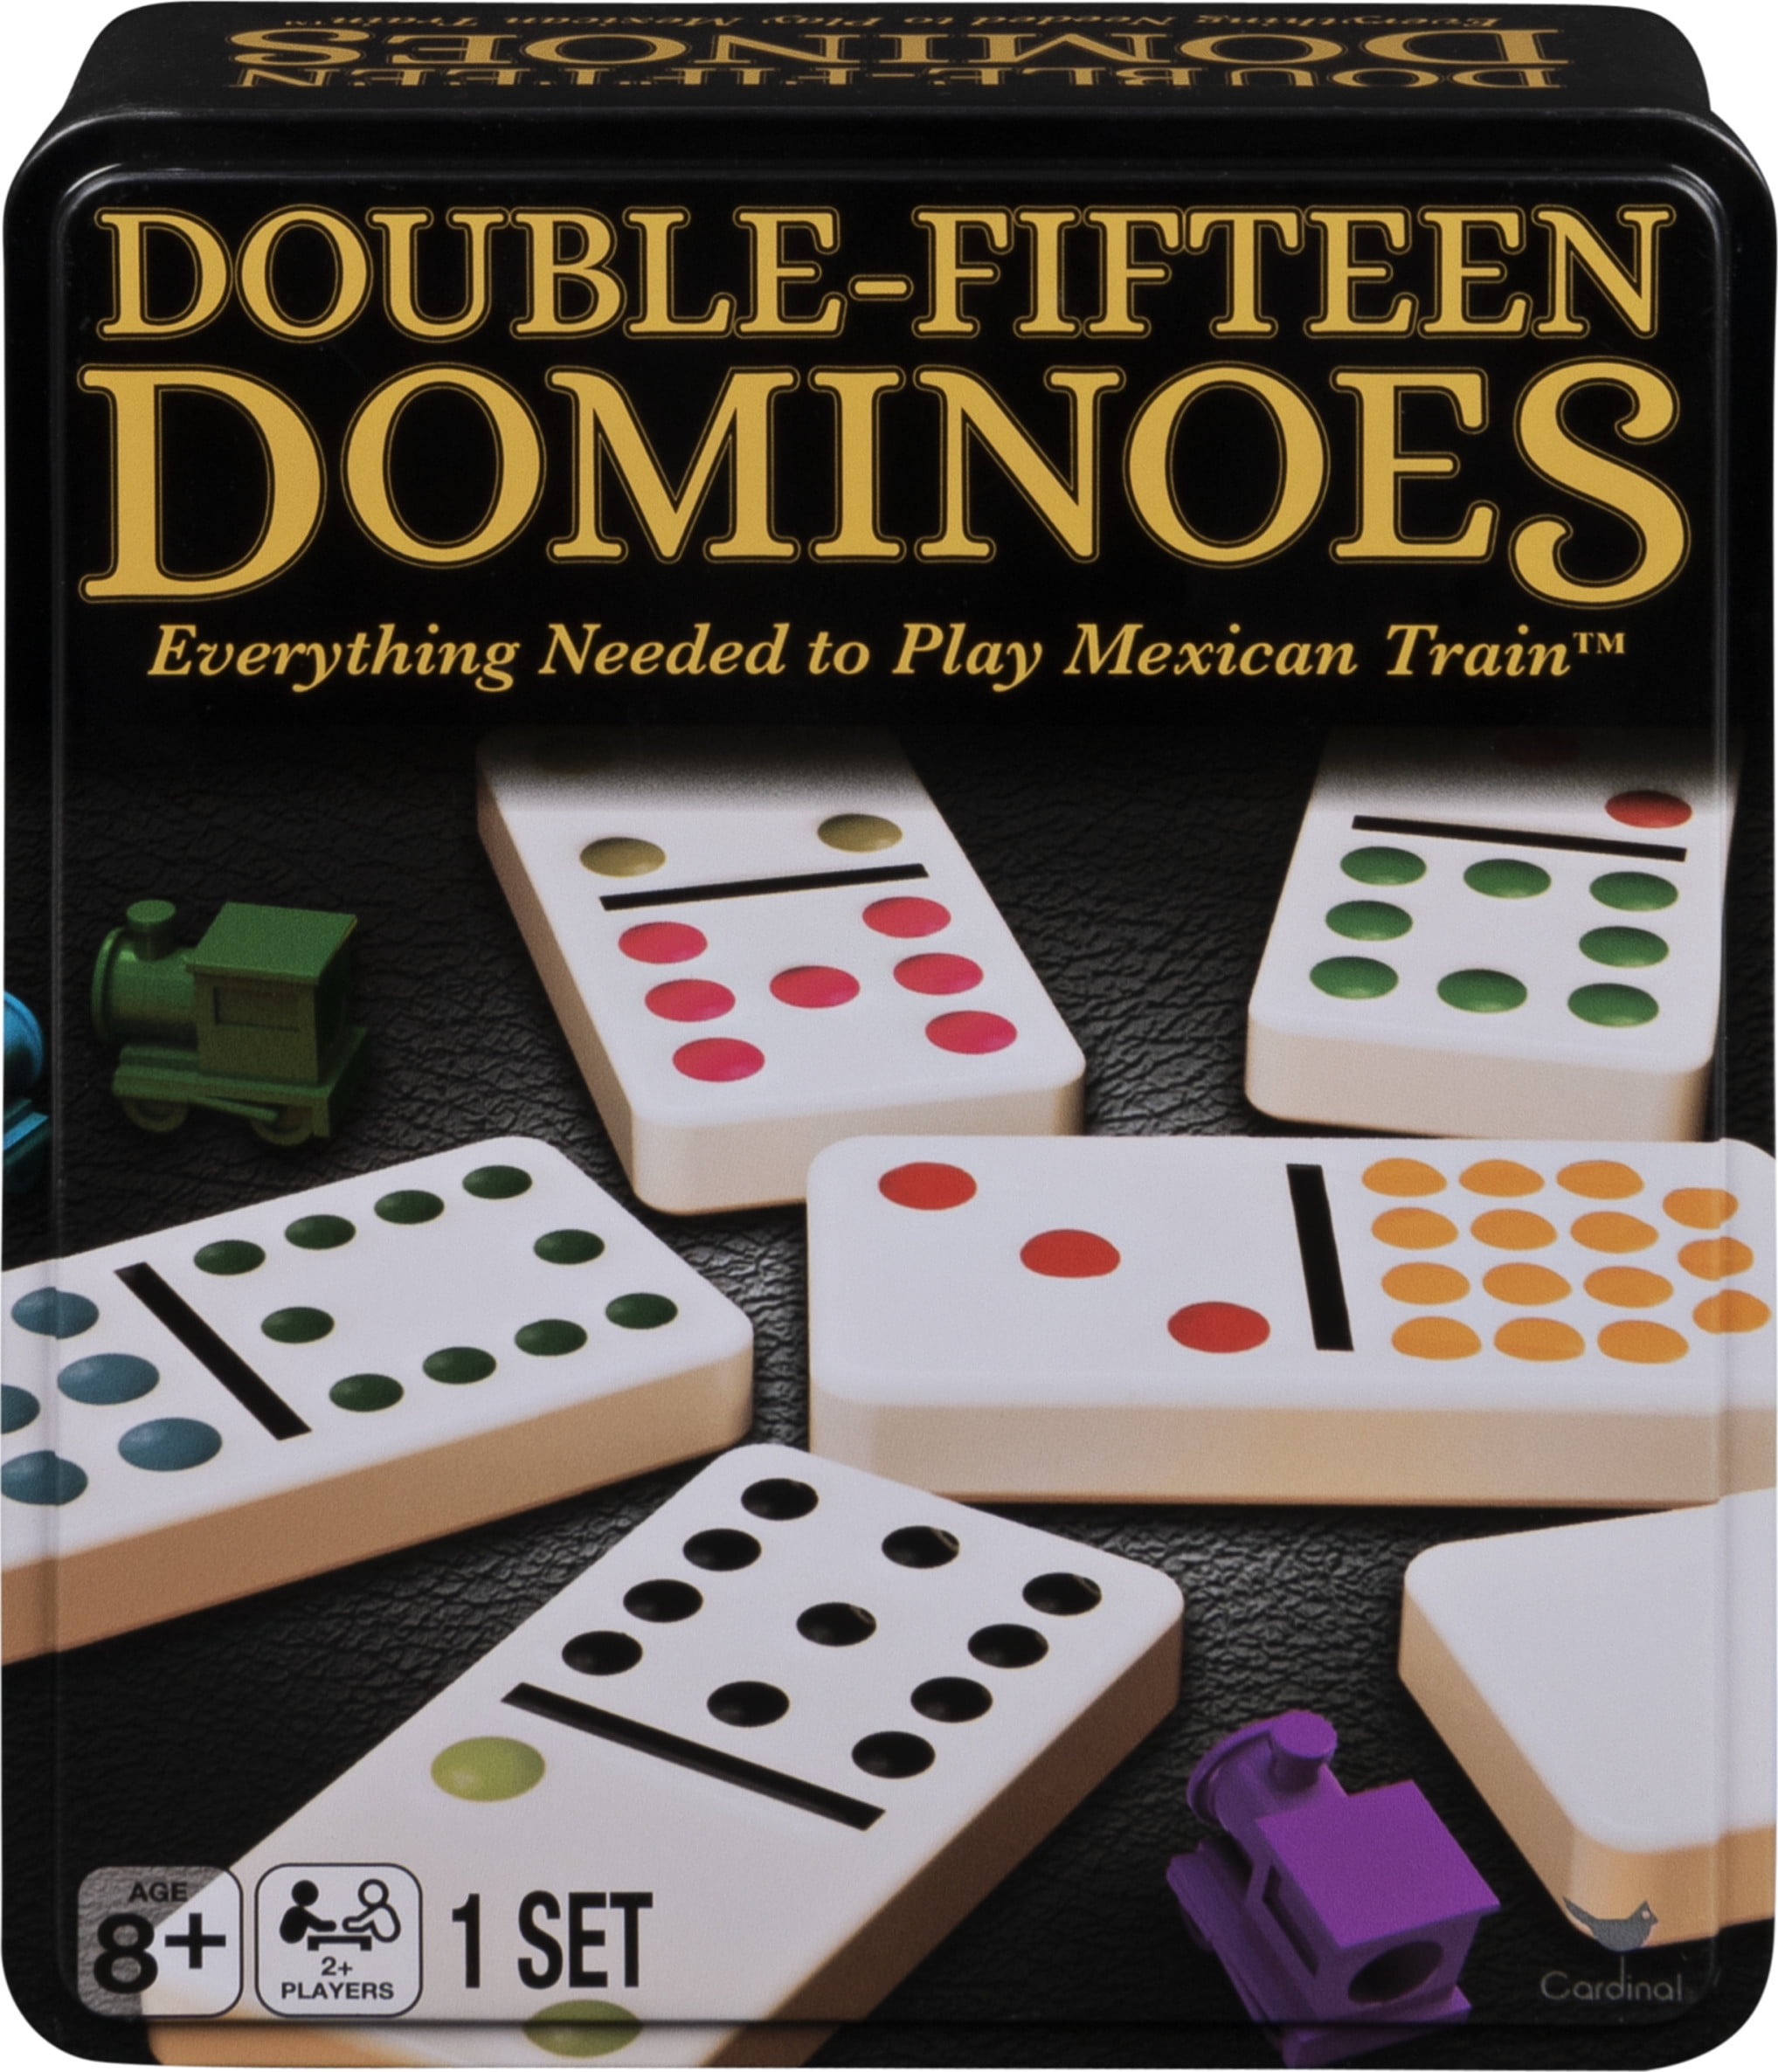 Set In 8-Player Mexican Train Dominoes Board Game Beautifully Colored Dominoes 